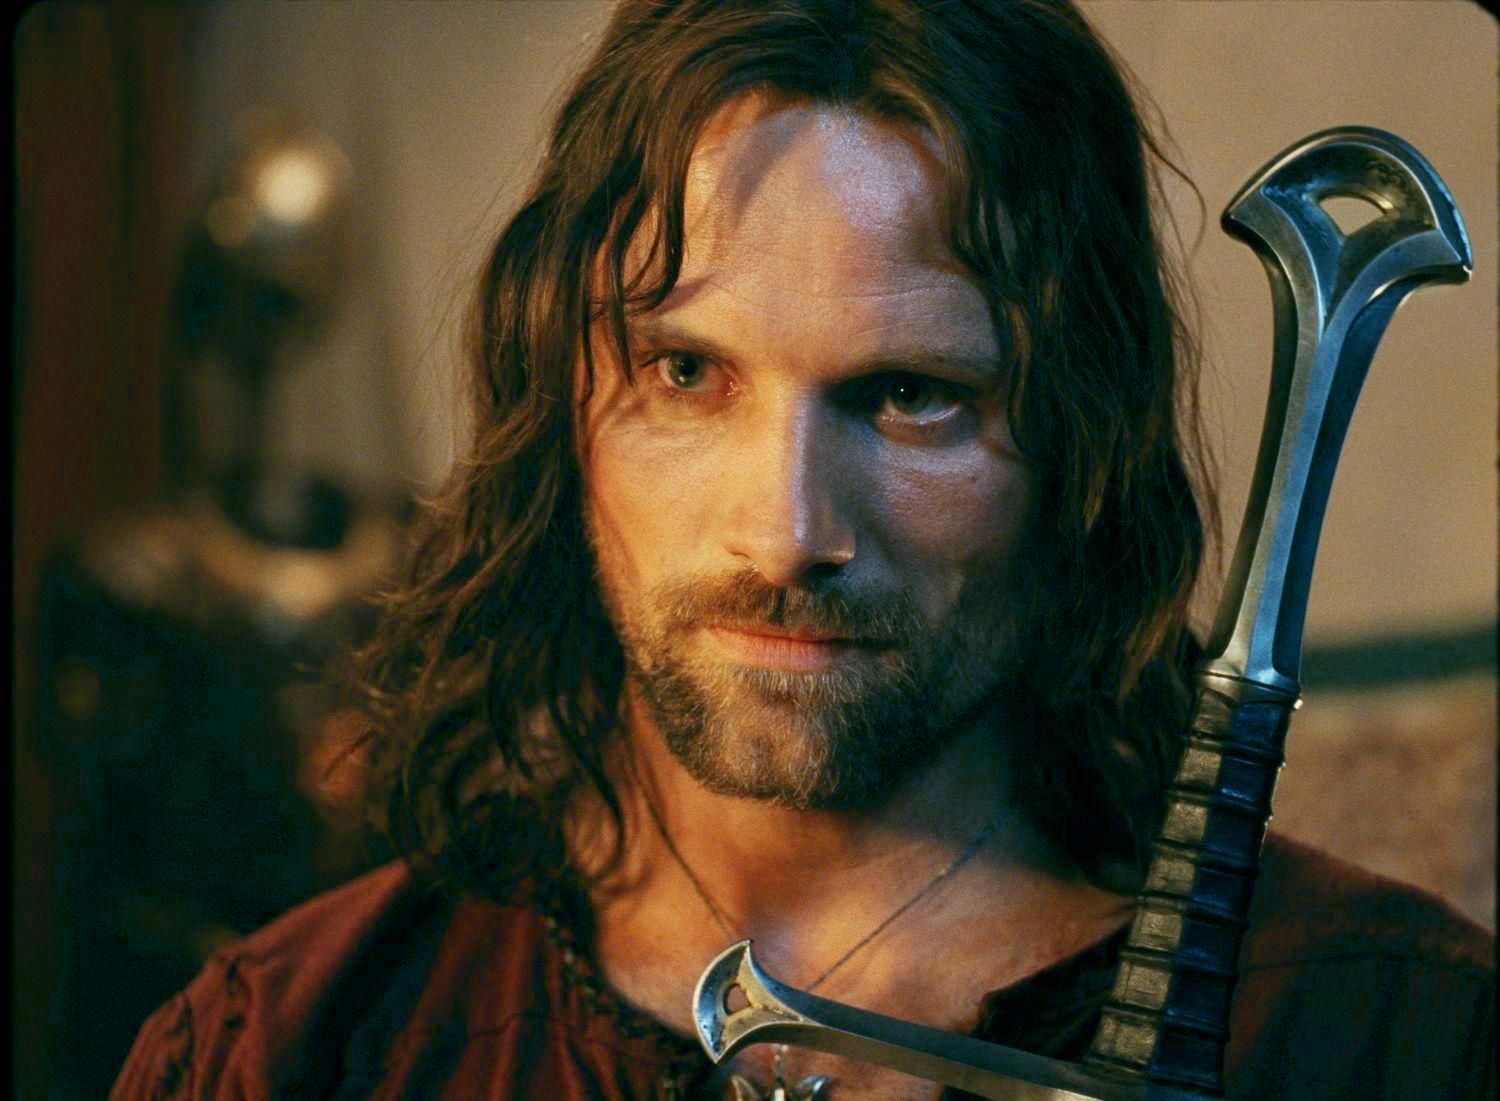 Aragorns Sword in Lord of the Rings